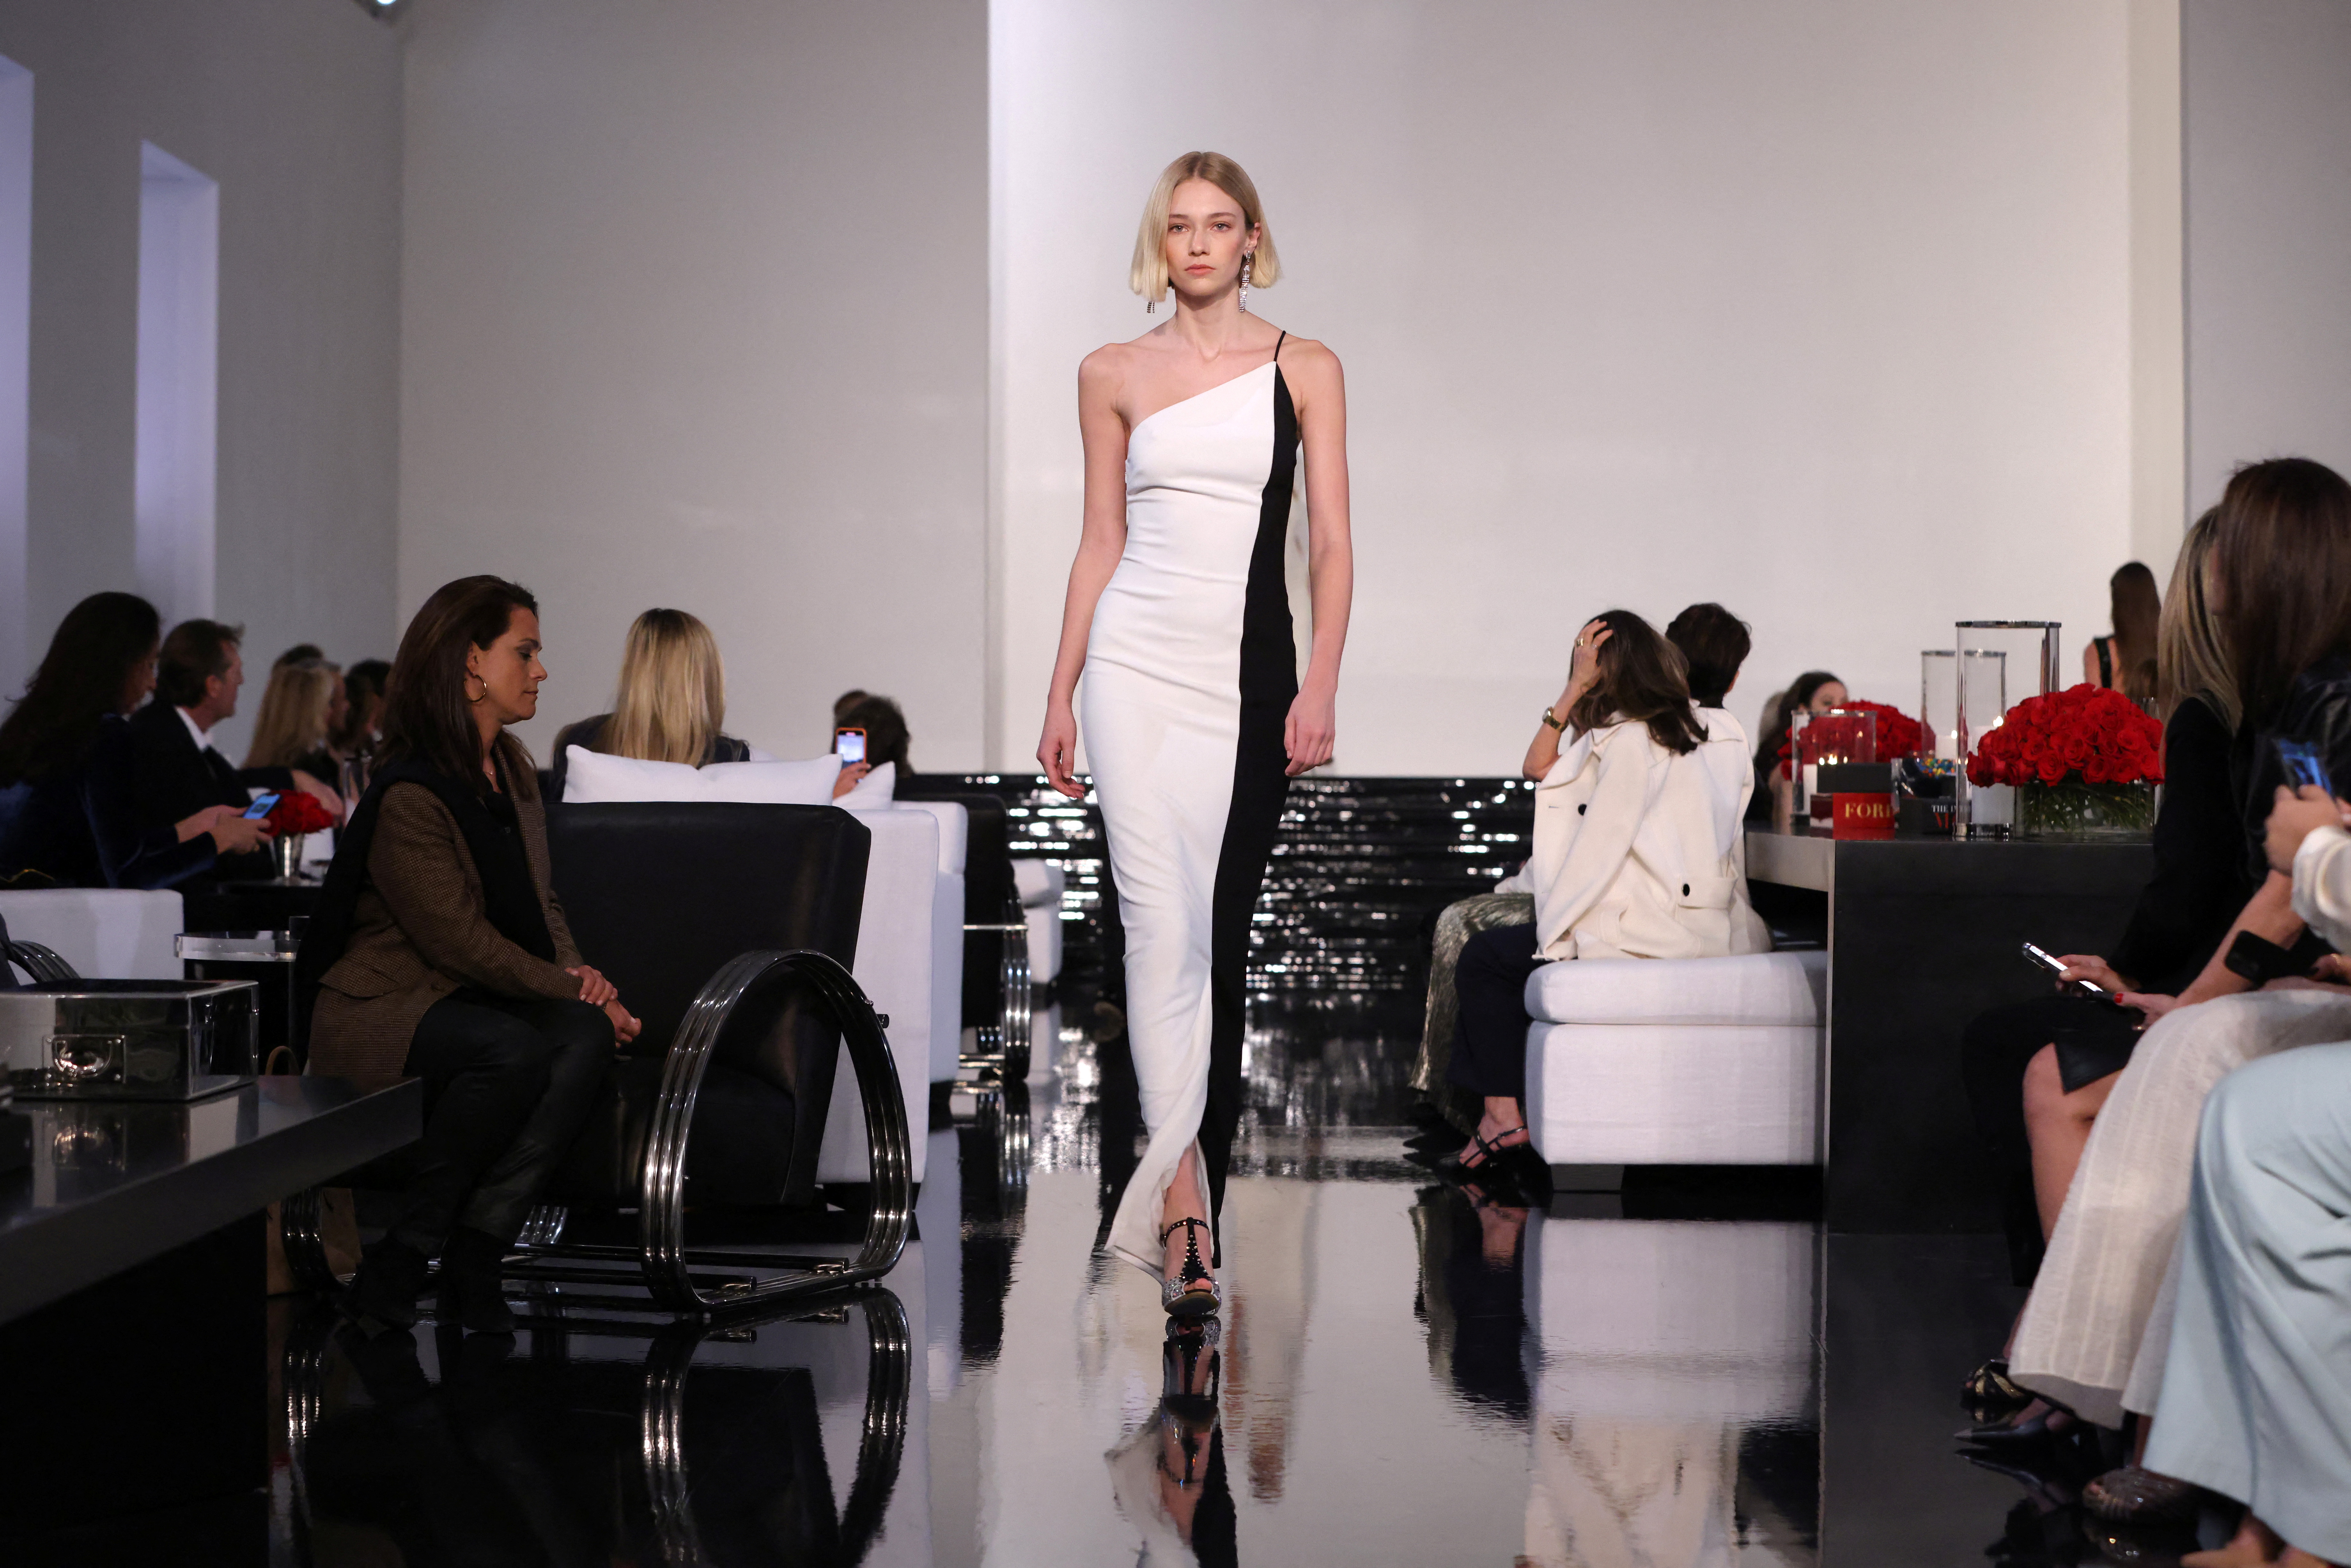 Ralph Lauren's 2022 fashion show brings home coziness to stage